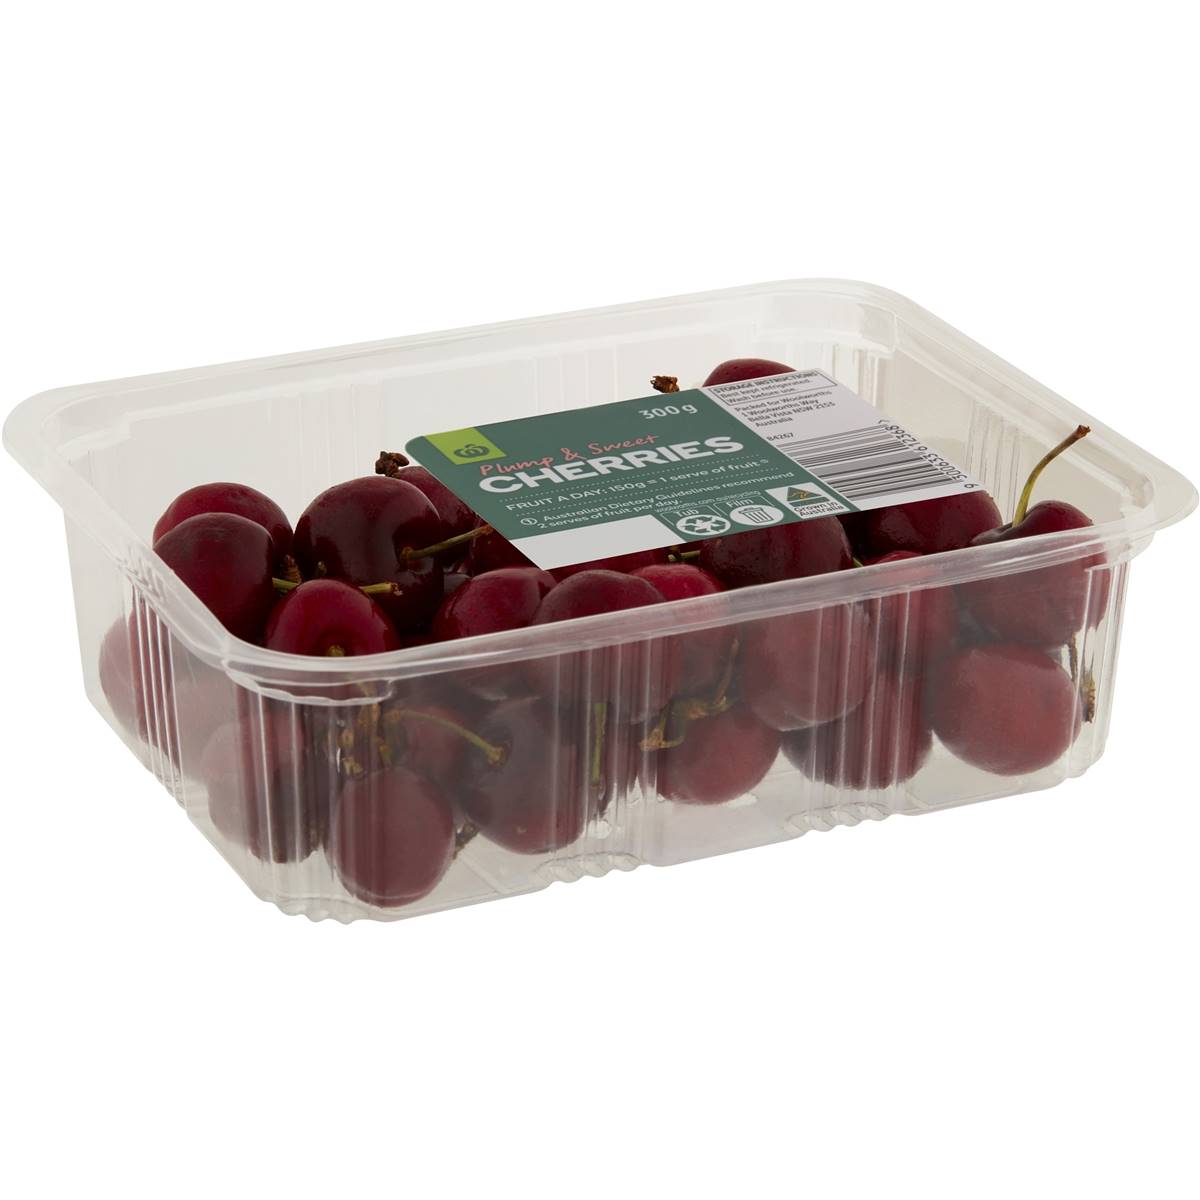 Calories in Woolworths Cherry Punnet